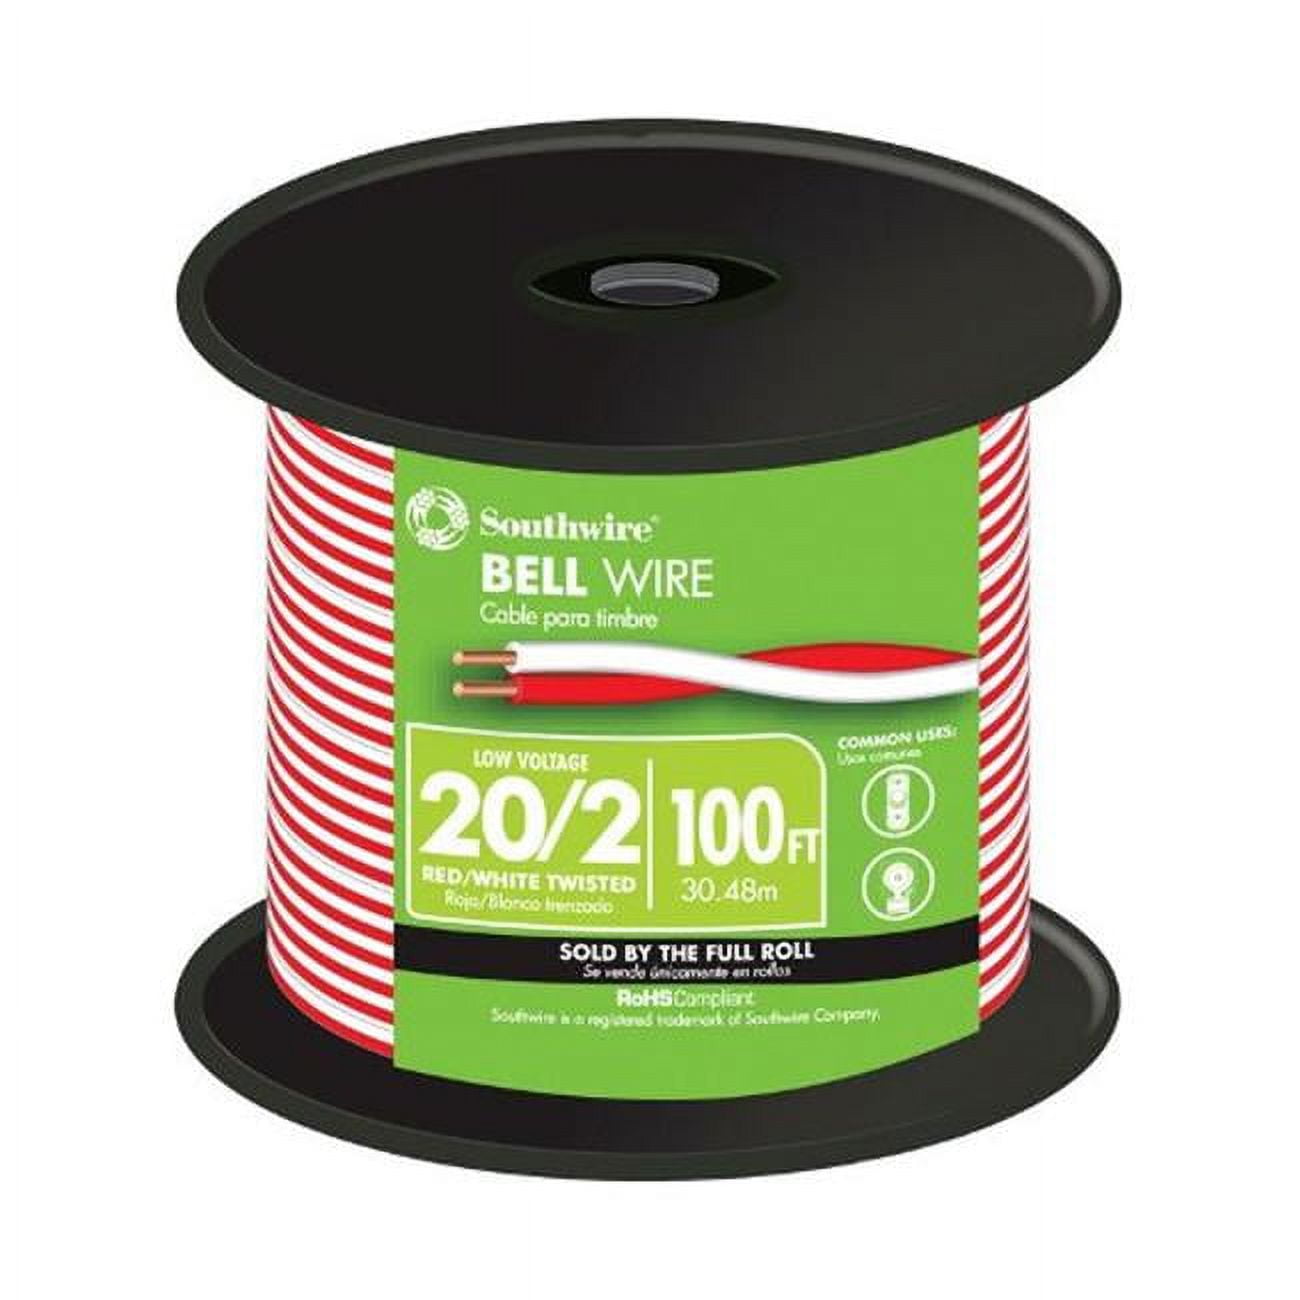 2PGBWIRE30 30' Roll of 2 Prong Bell Wire for Sensors and Wall Consoles